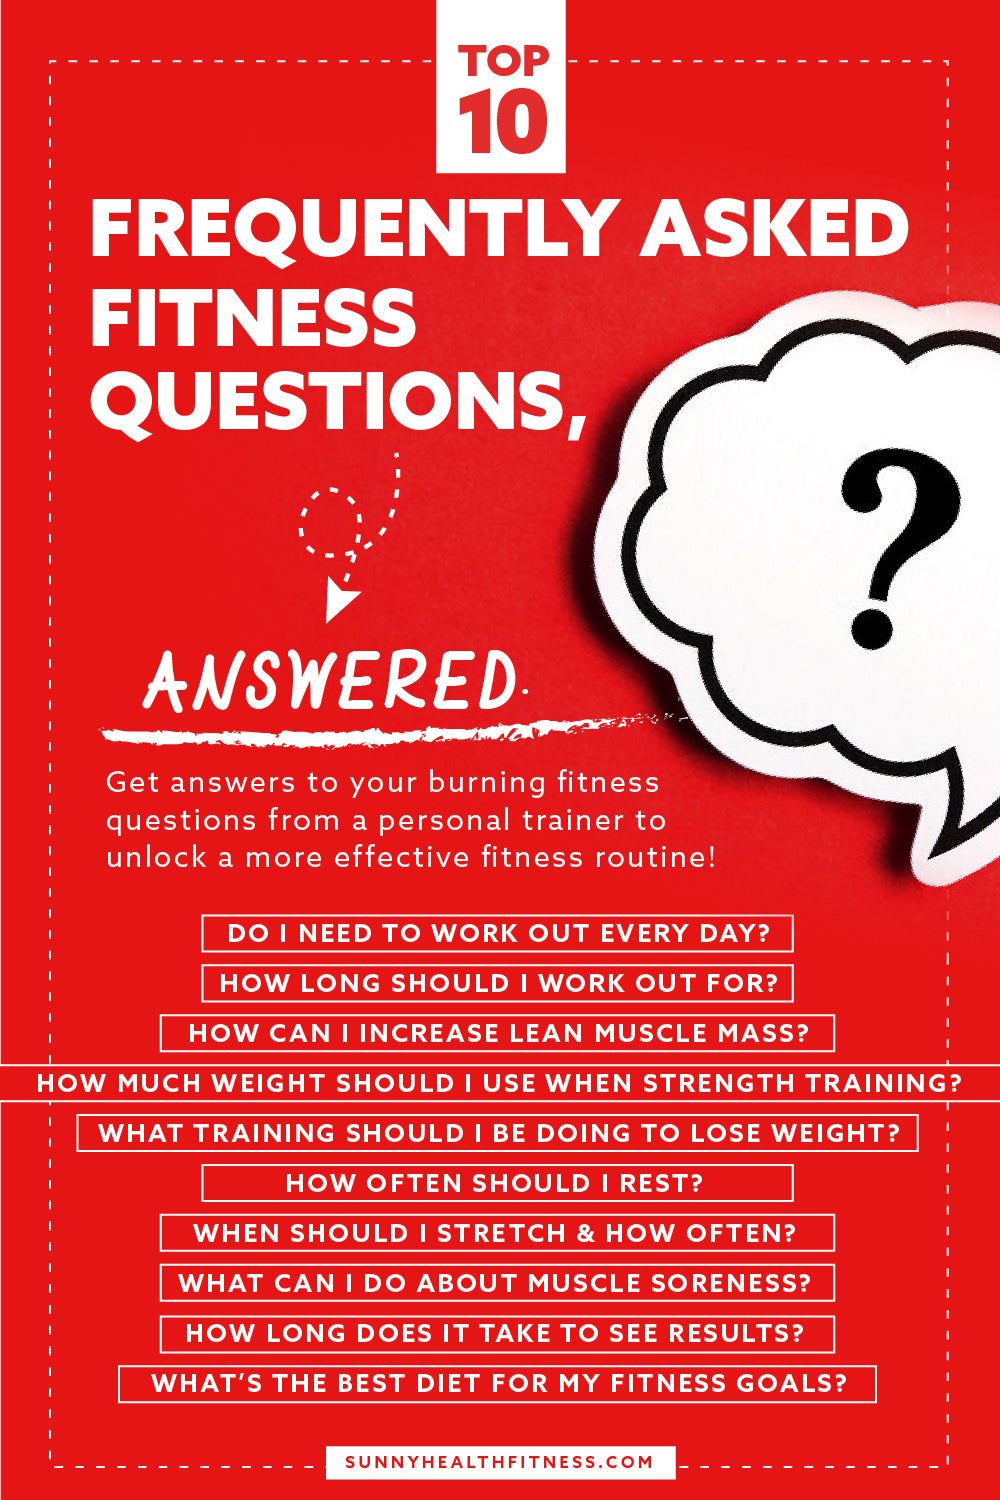 Top 10 Frequently Asked Fitness Questions, Answered